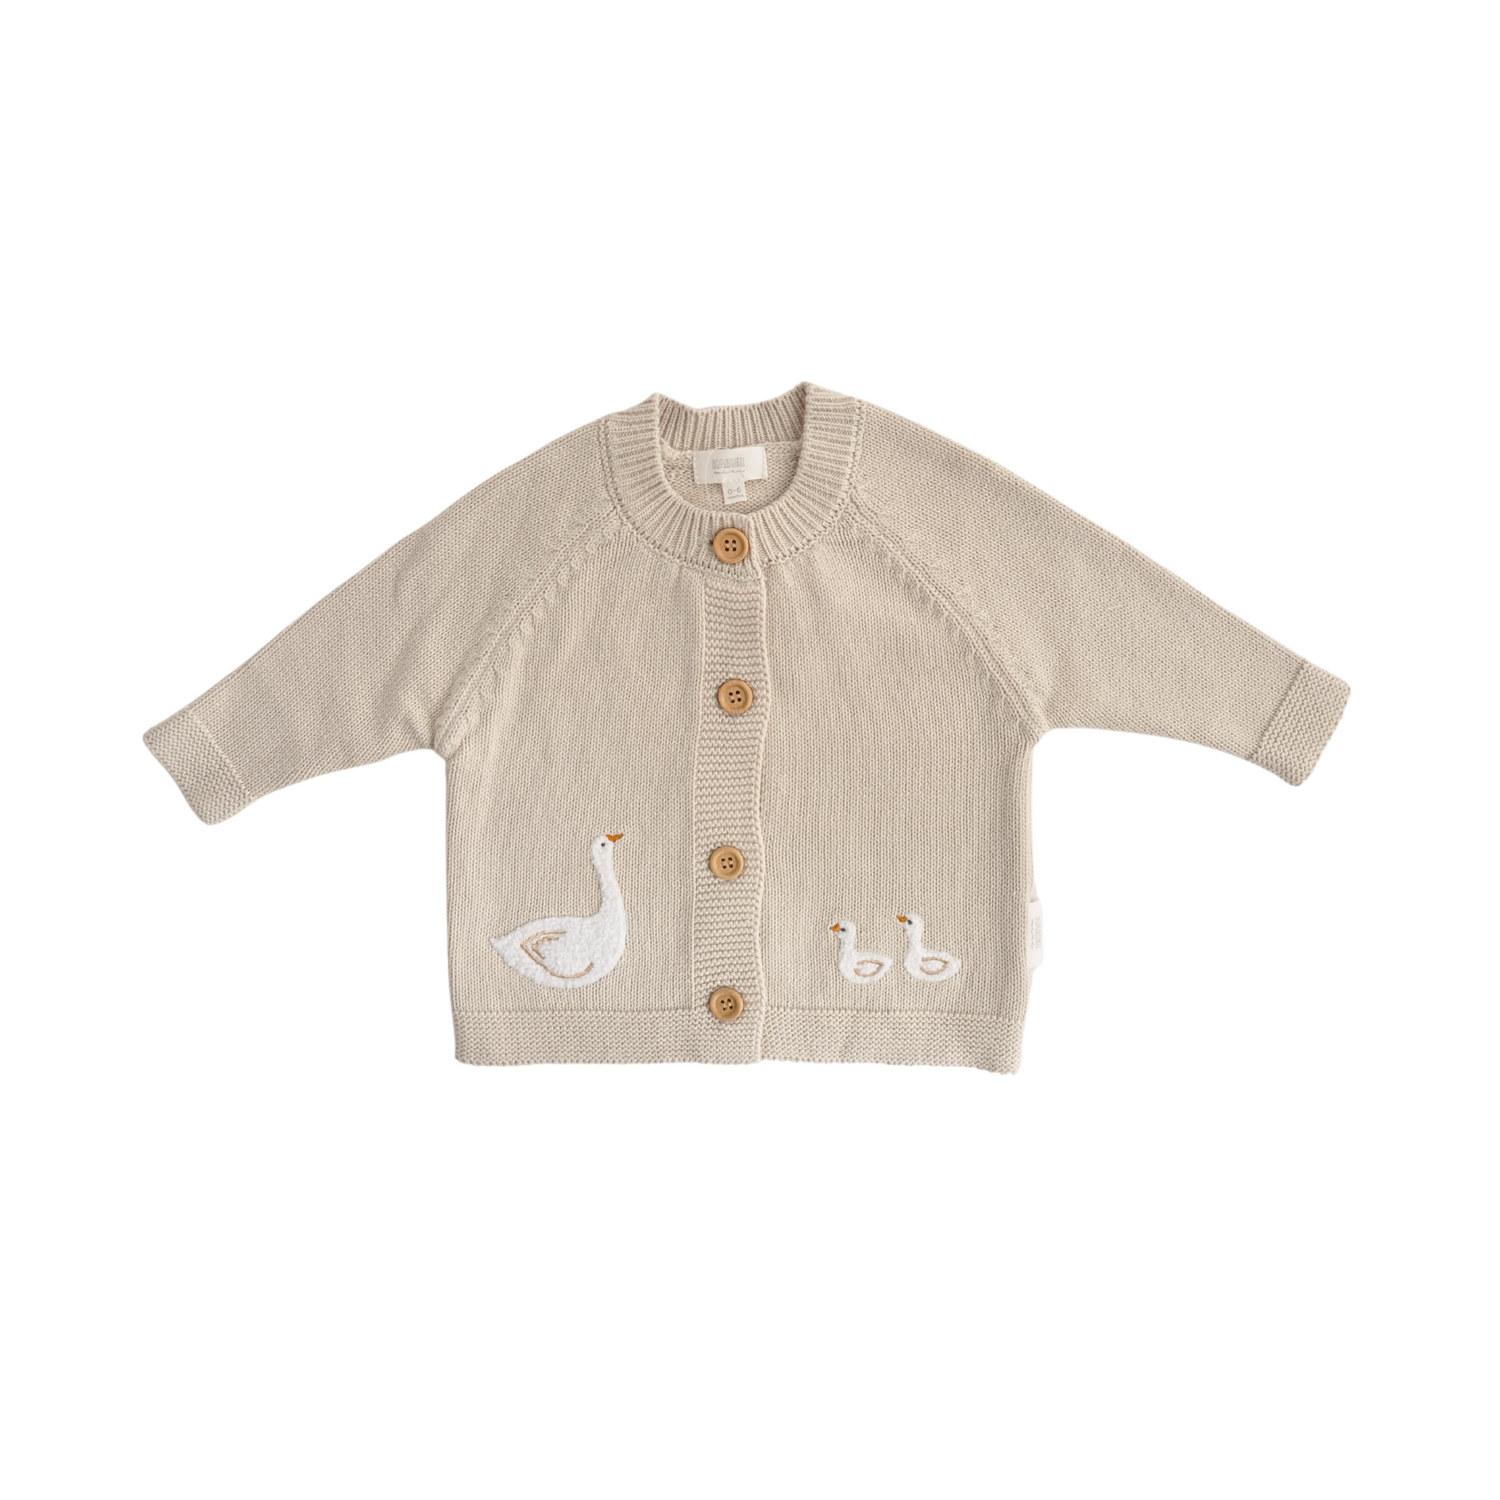 Kids & Baby - Baby Wear - Clothing